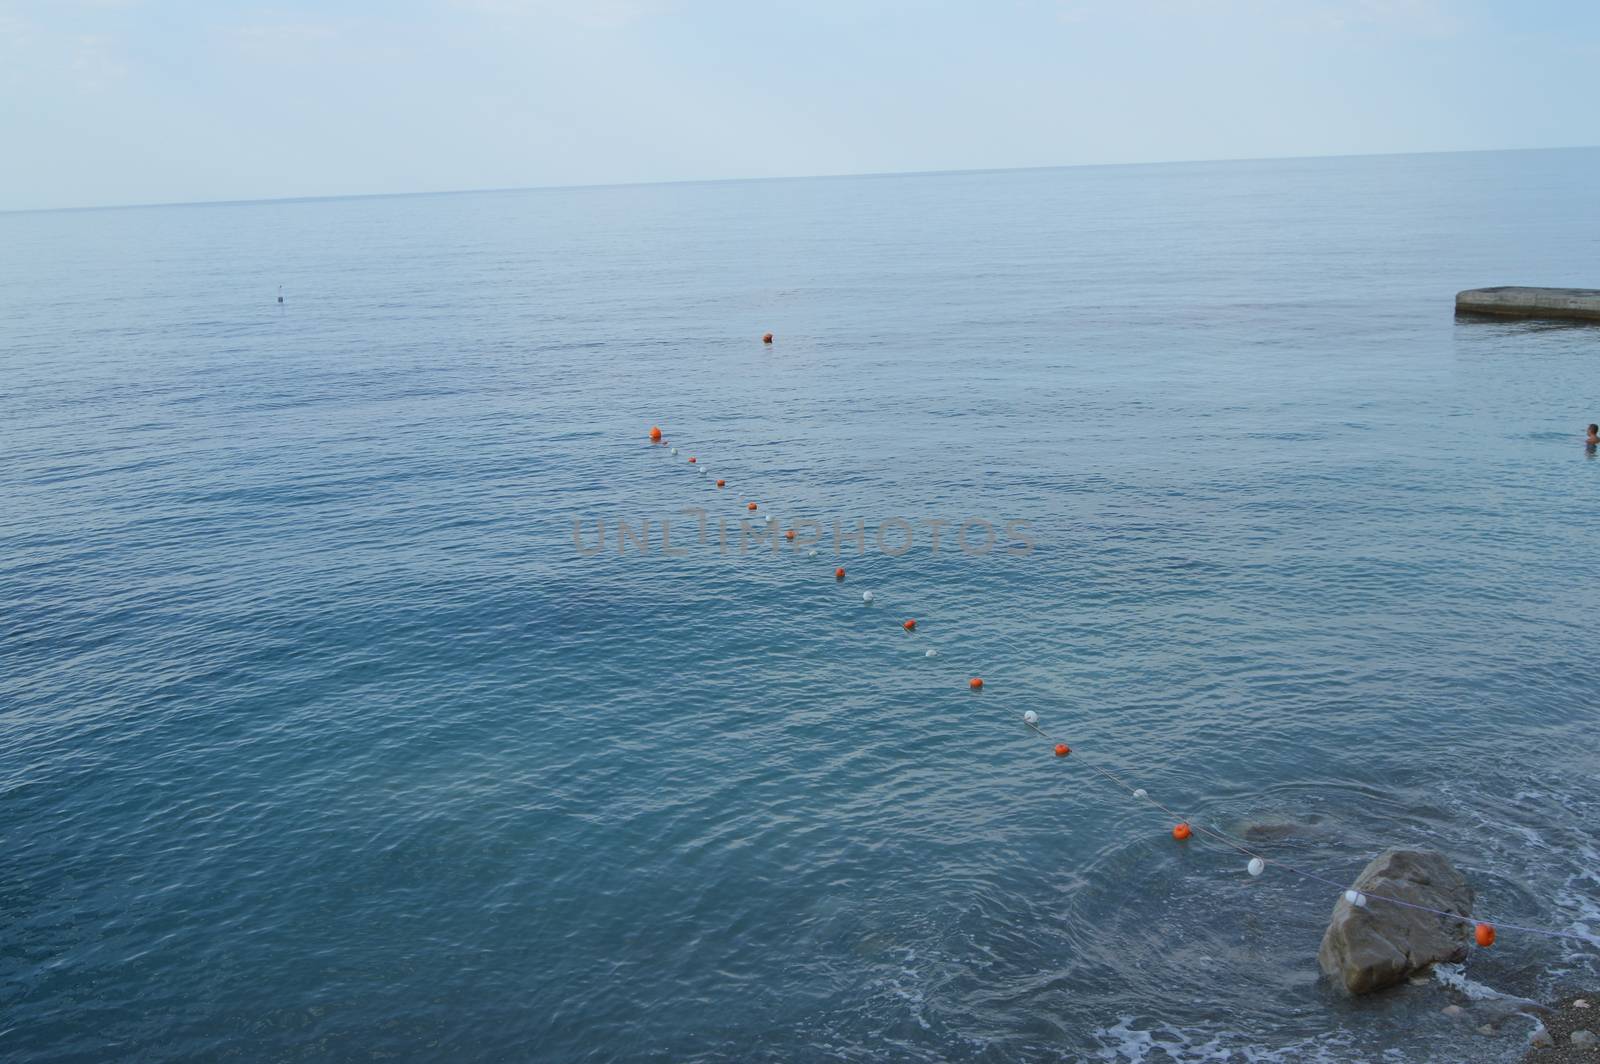 Separation buoys in the sea for safe swimming on the beach.